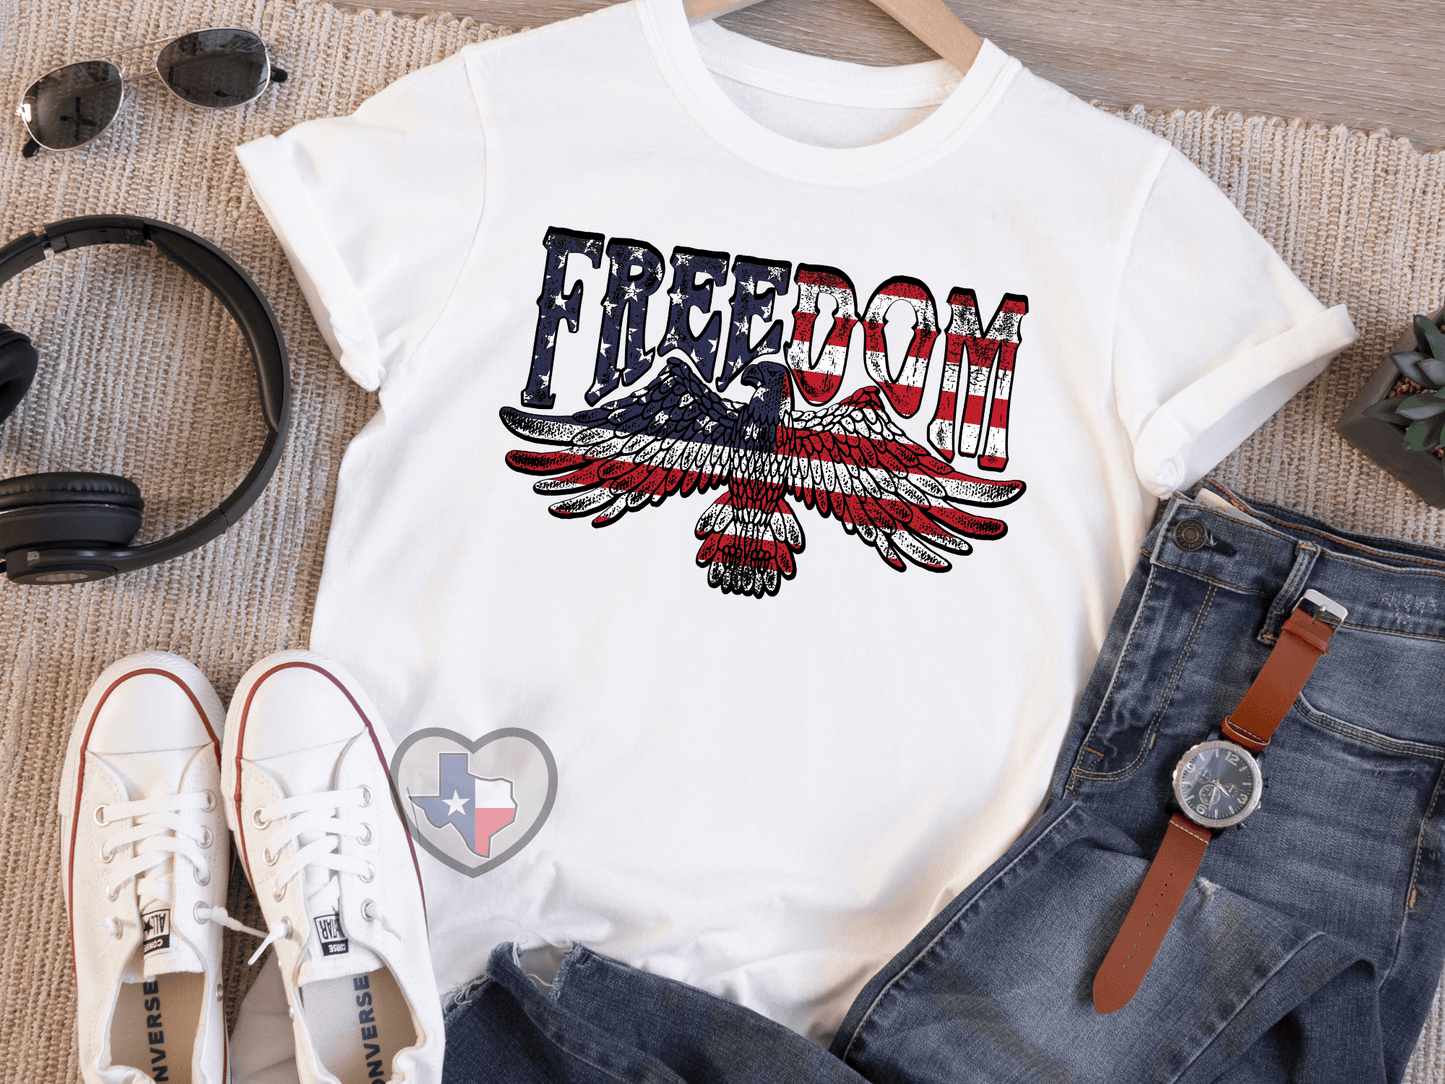 Freedom Eagle HIGH HEAT - Texas Transfers and Designs